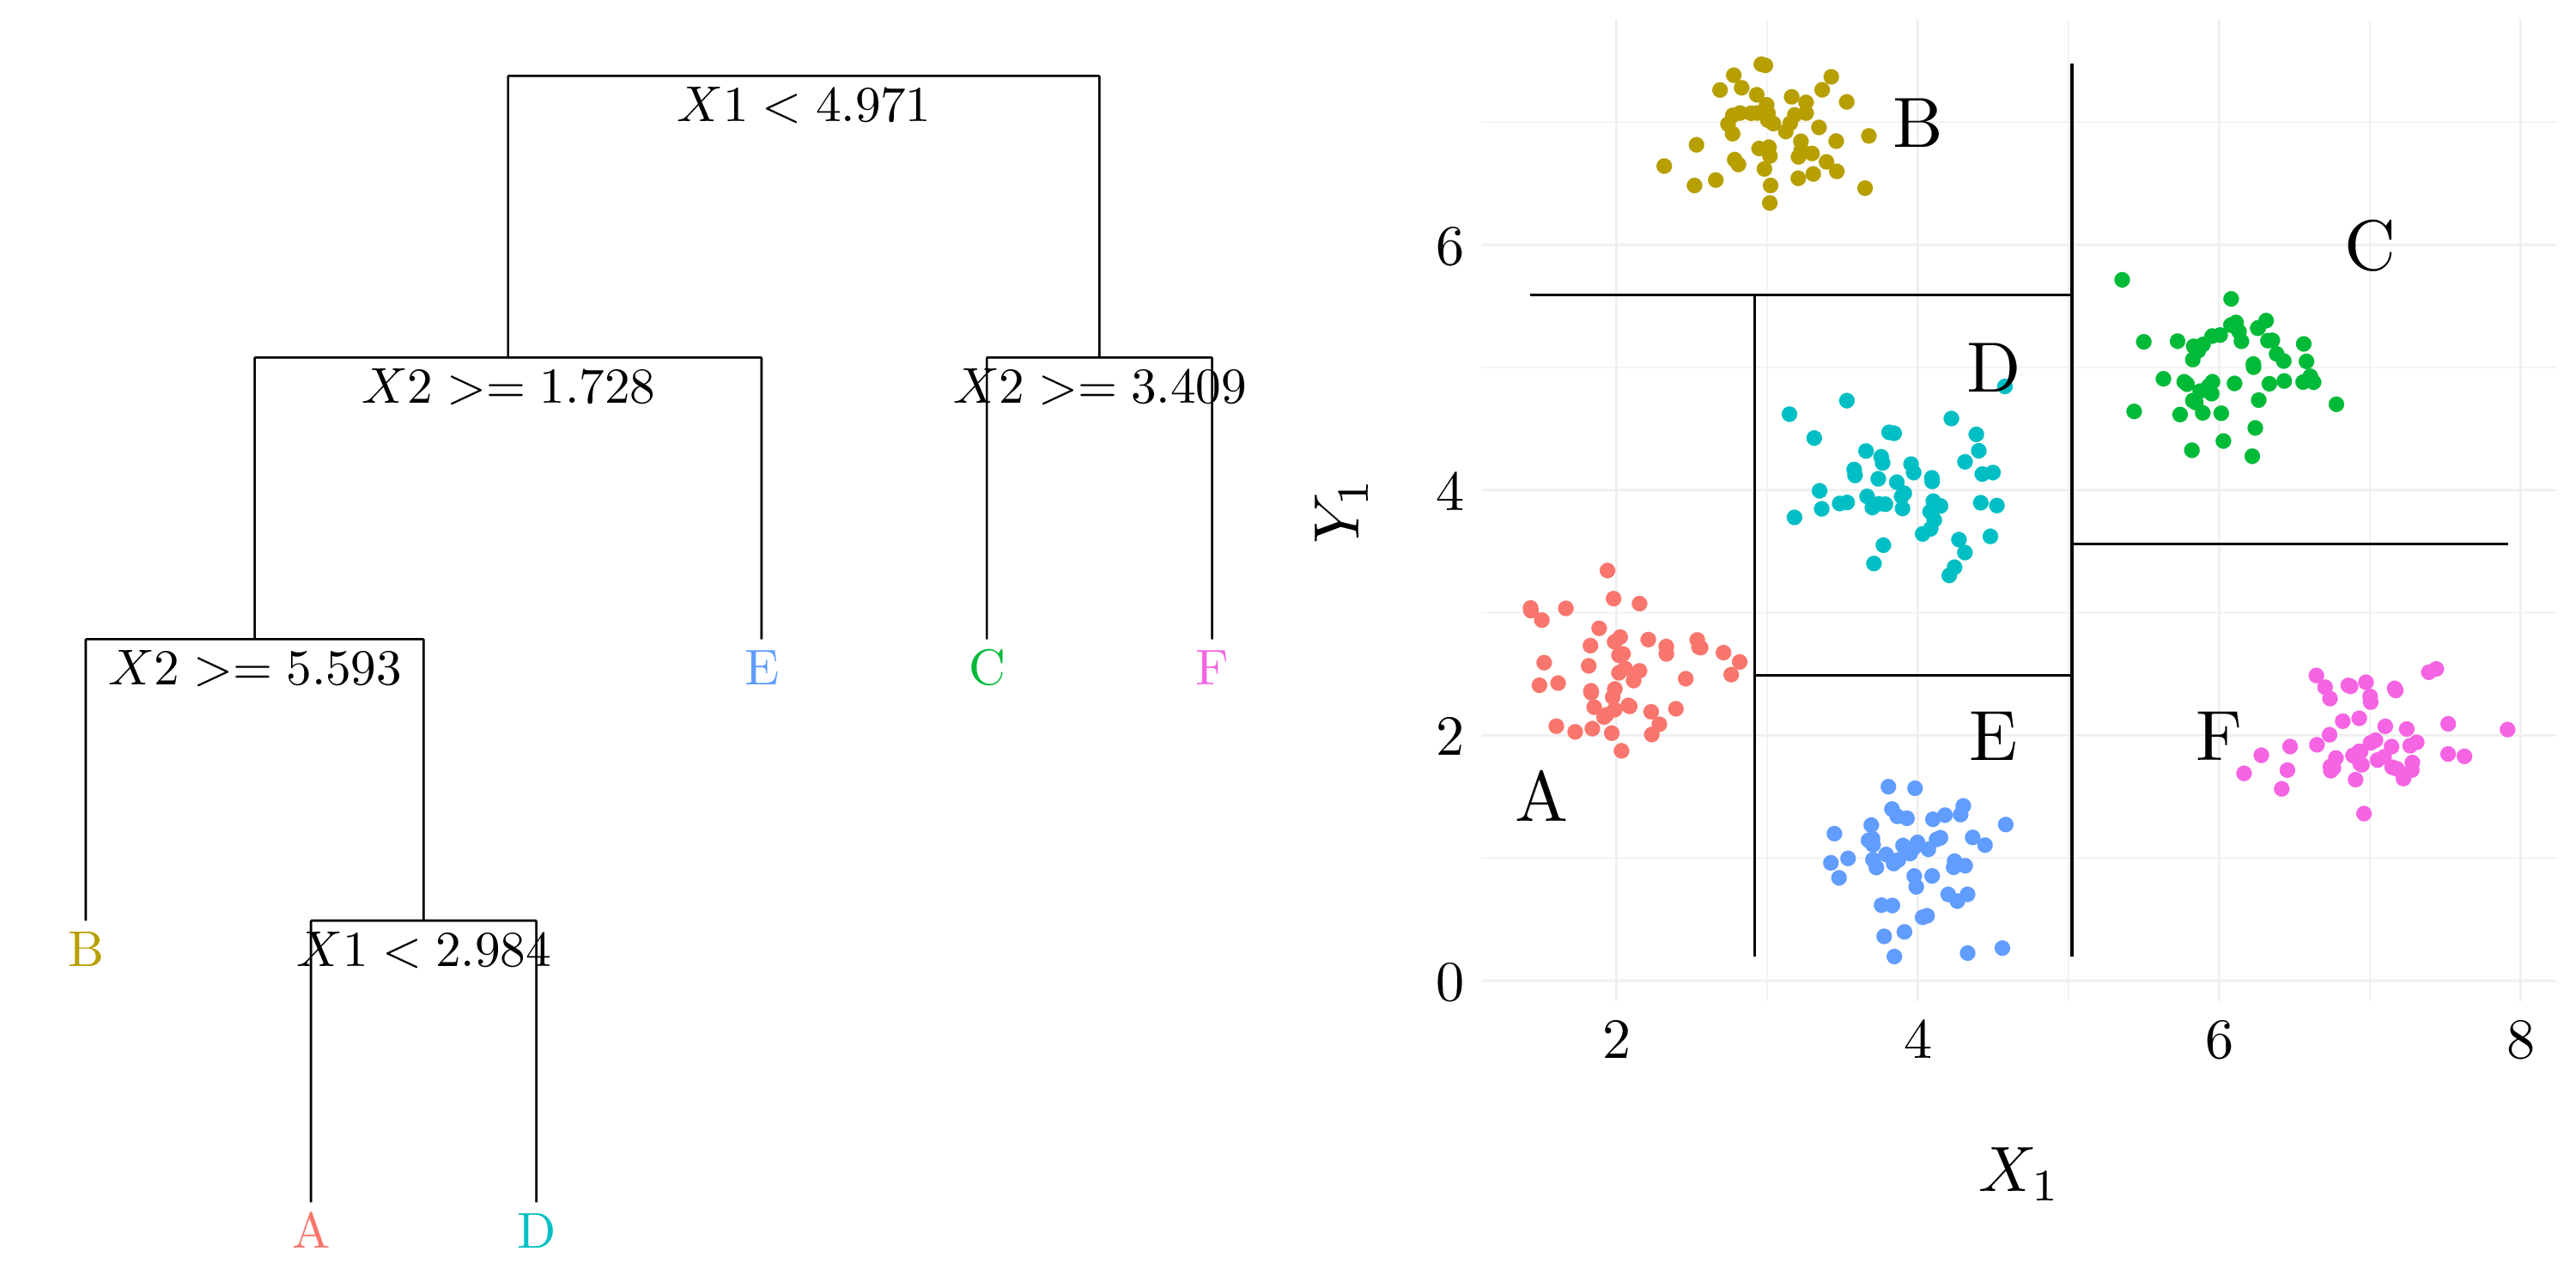 Example of results from binary splitting.